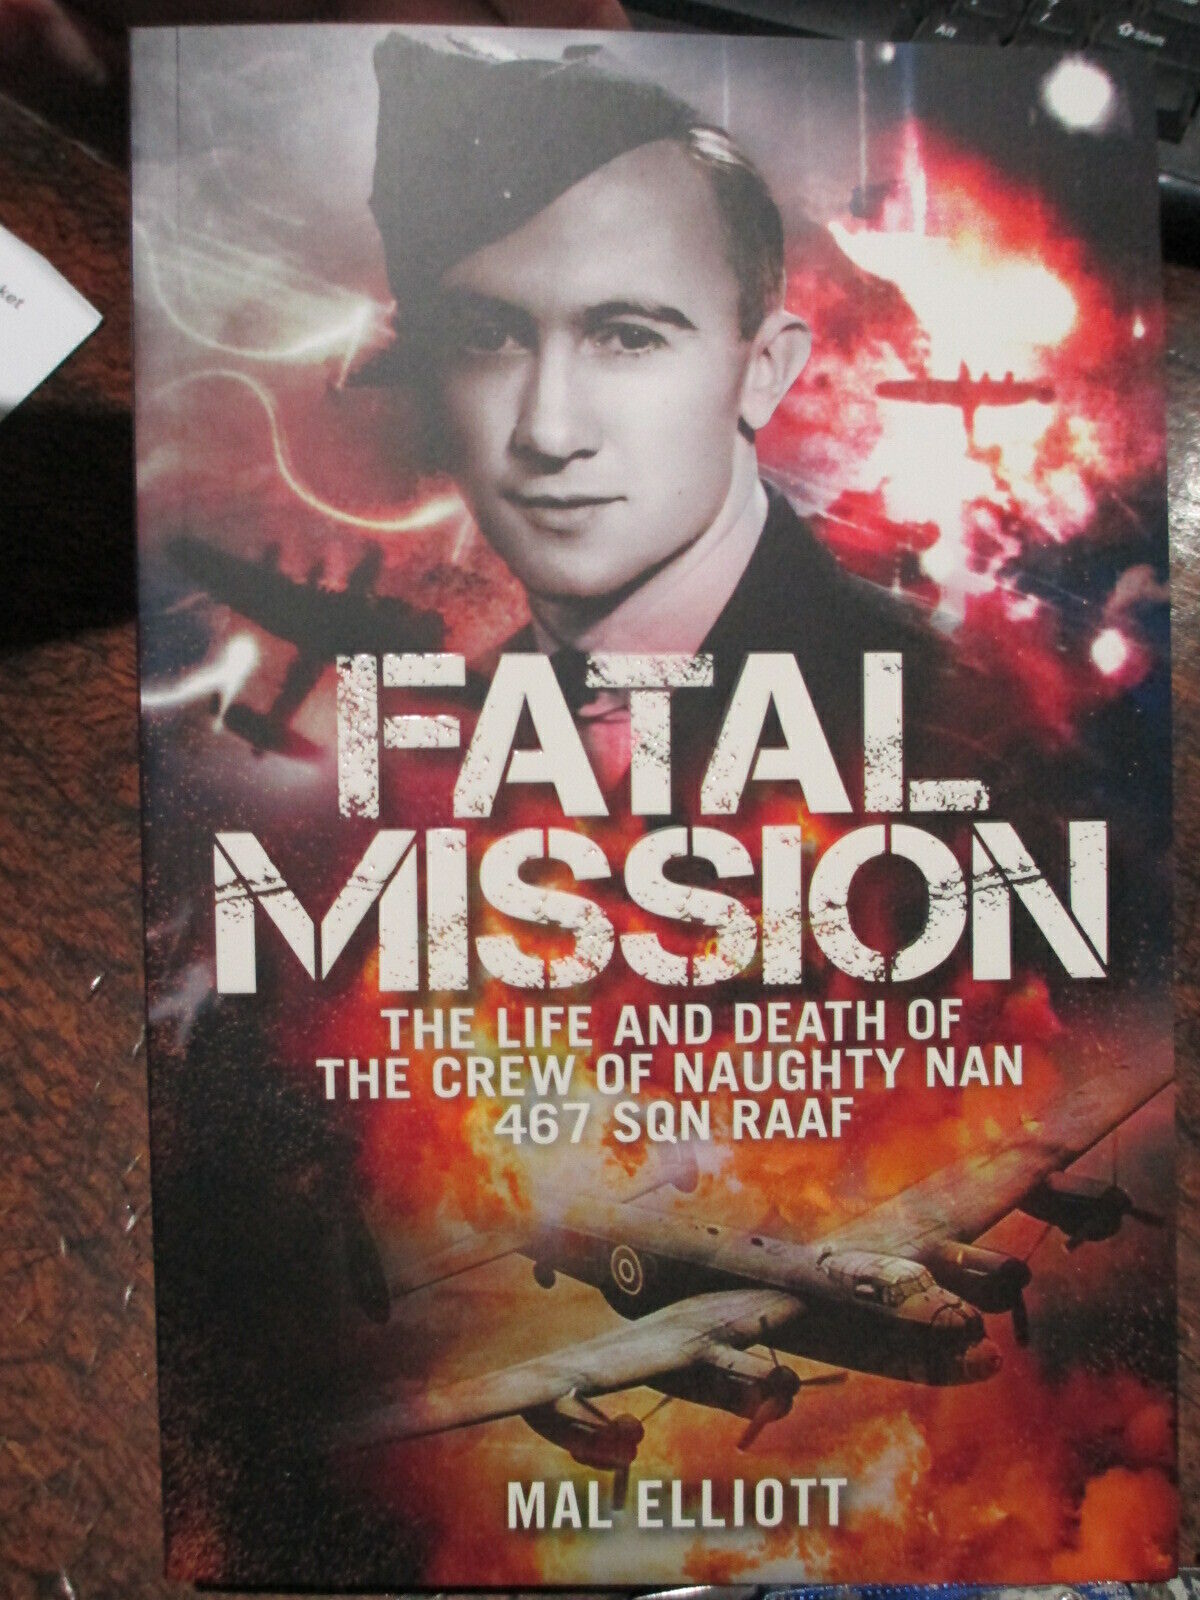 467 SQN RAAF Fatal Mission Life and Death of the Crew of Naughty Nan new book